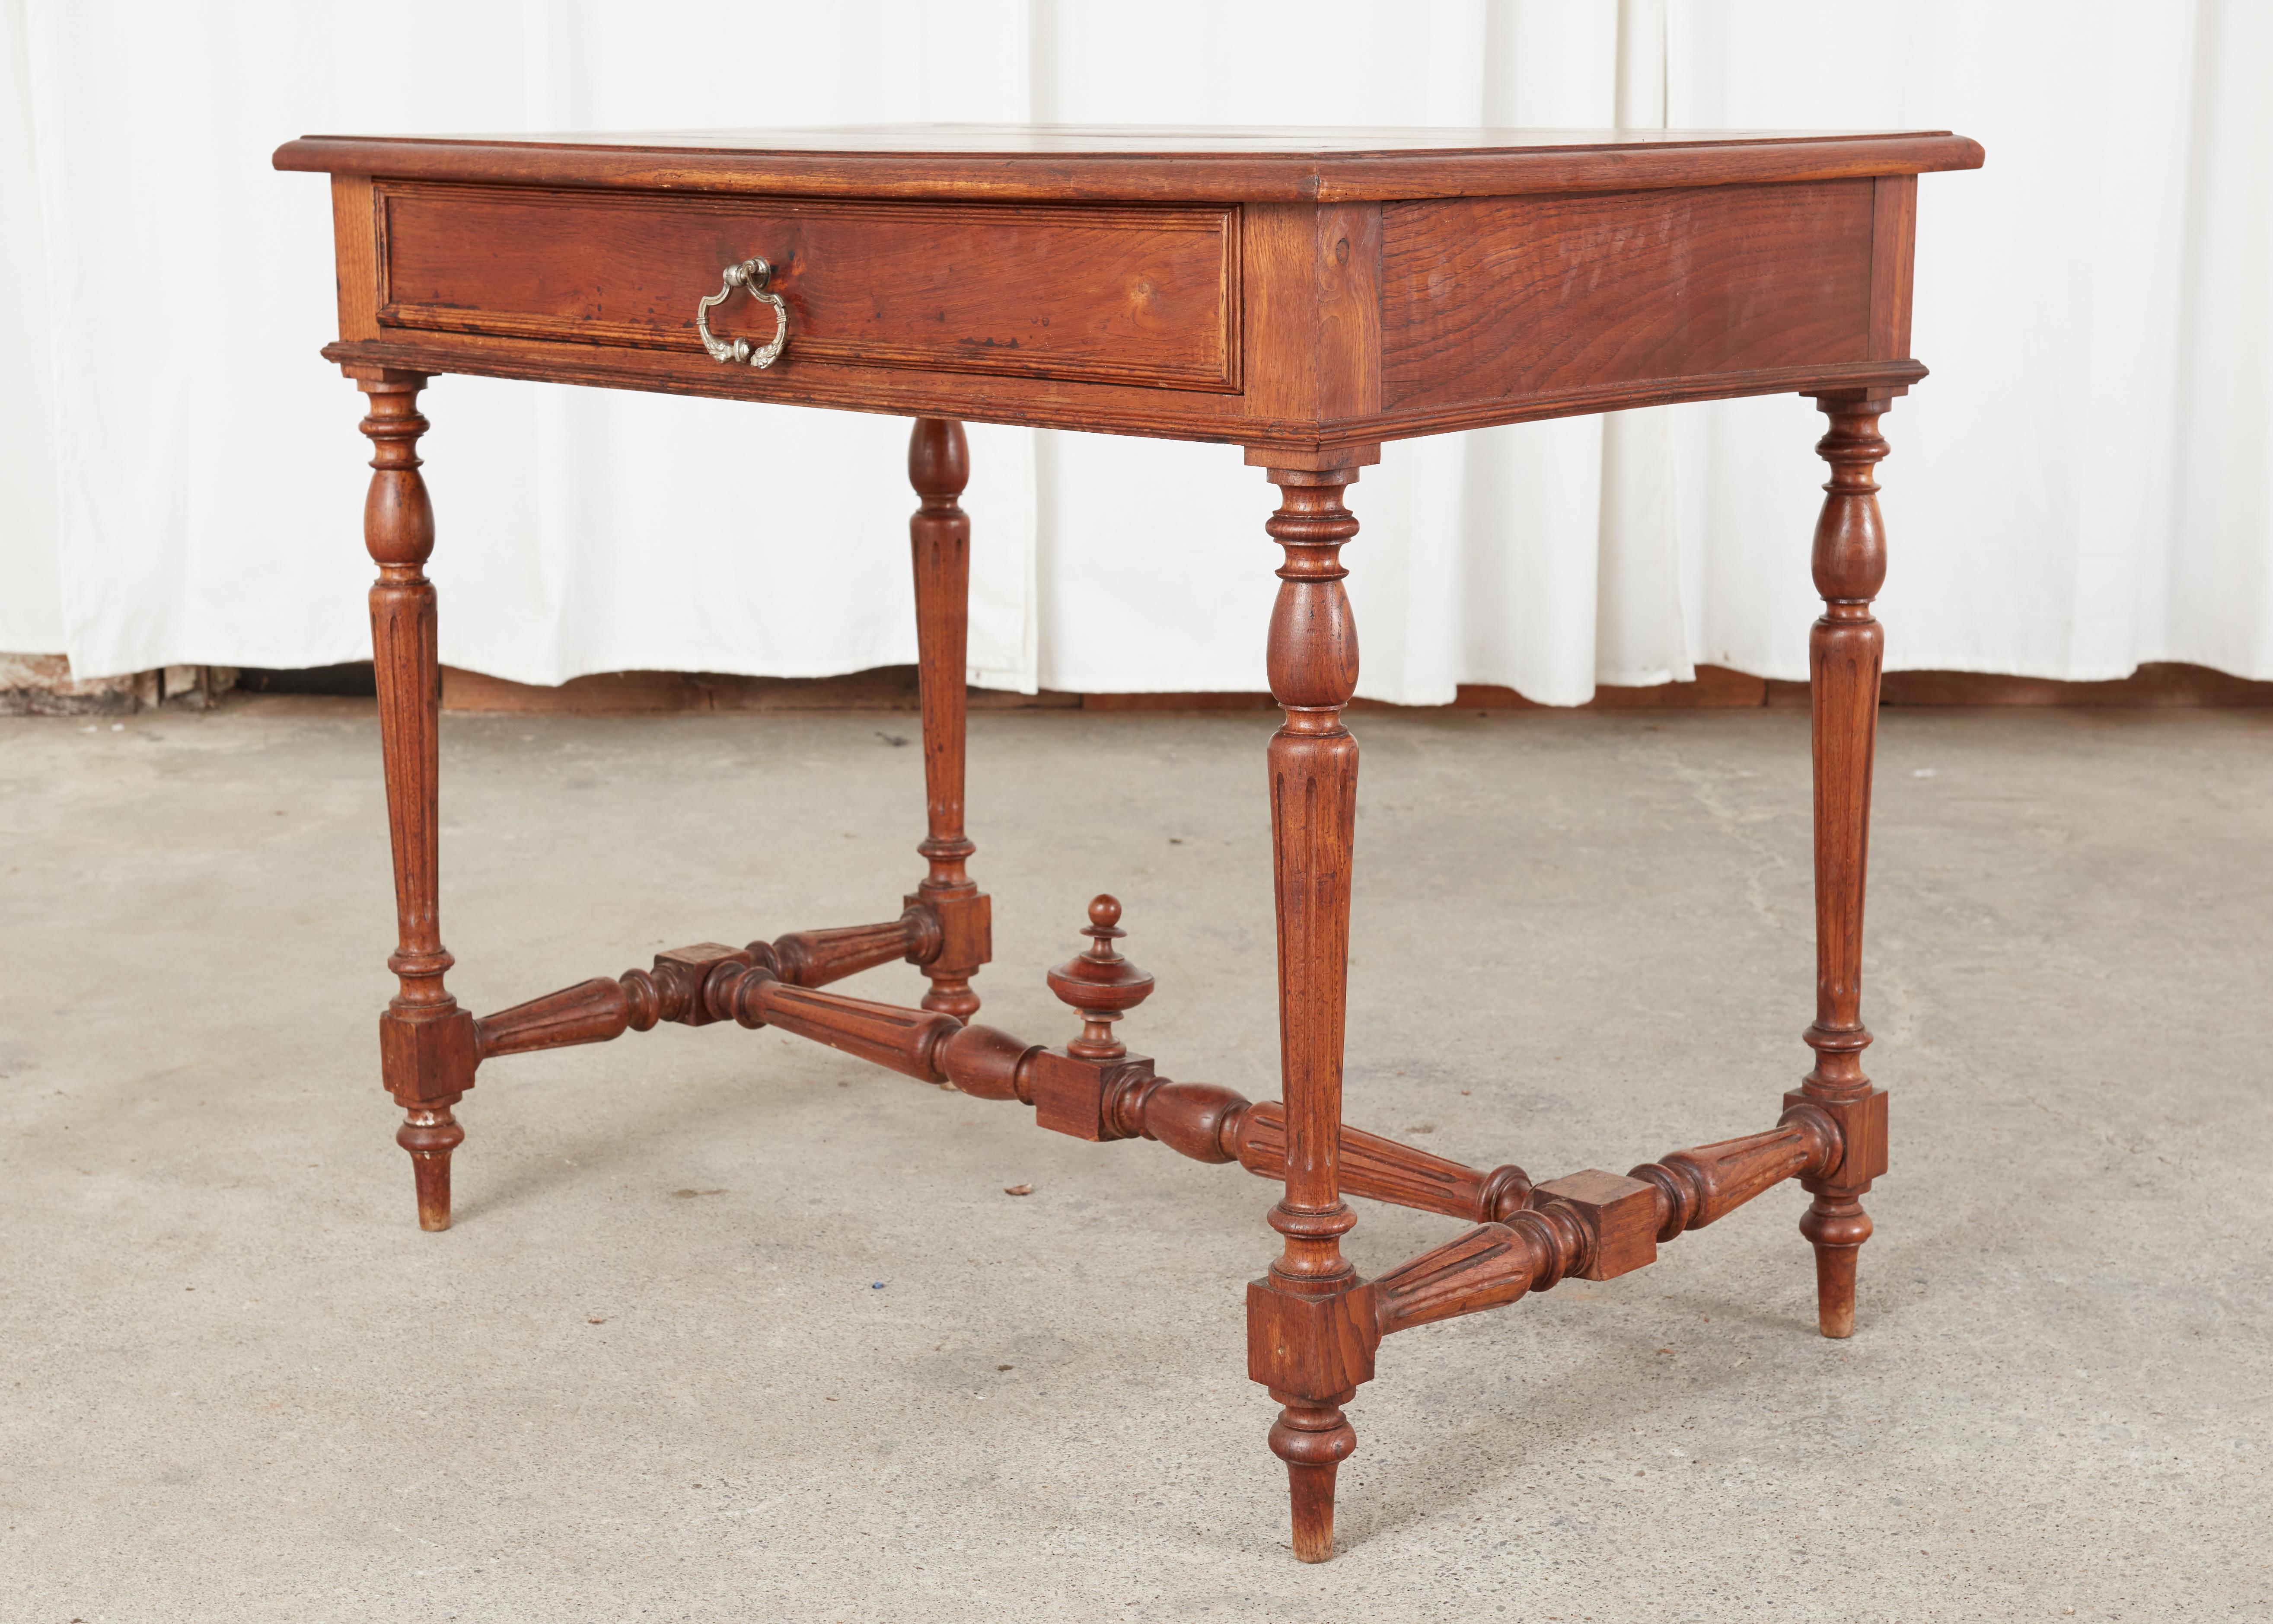 Diminutive size 19th century French provincial writing table or desk. The table is constructed from fruitwood with a warm patina and lovely wood grain patterns. Fronted by a single storage drawer in the front the case is supported by elegant tapered